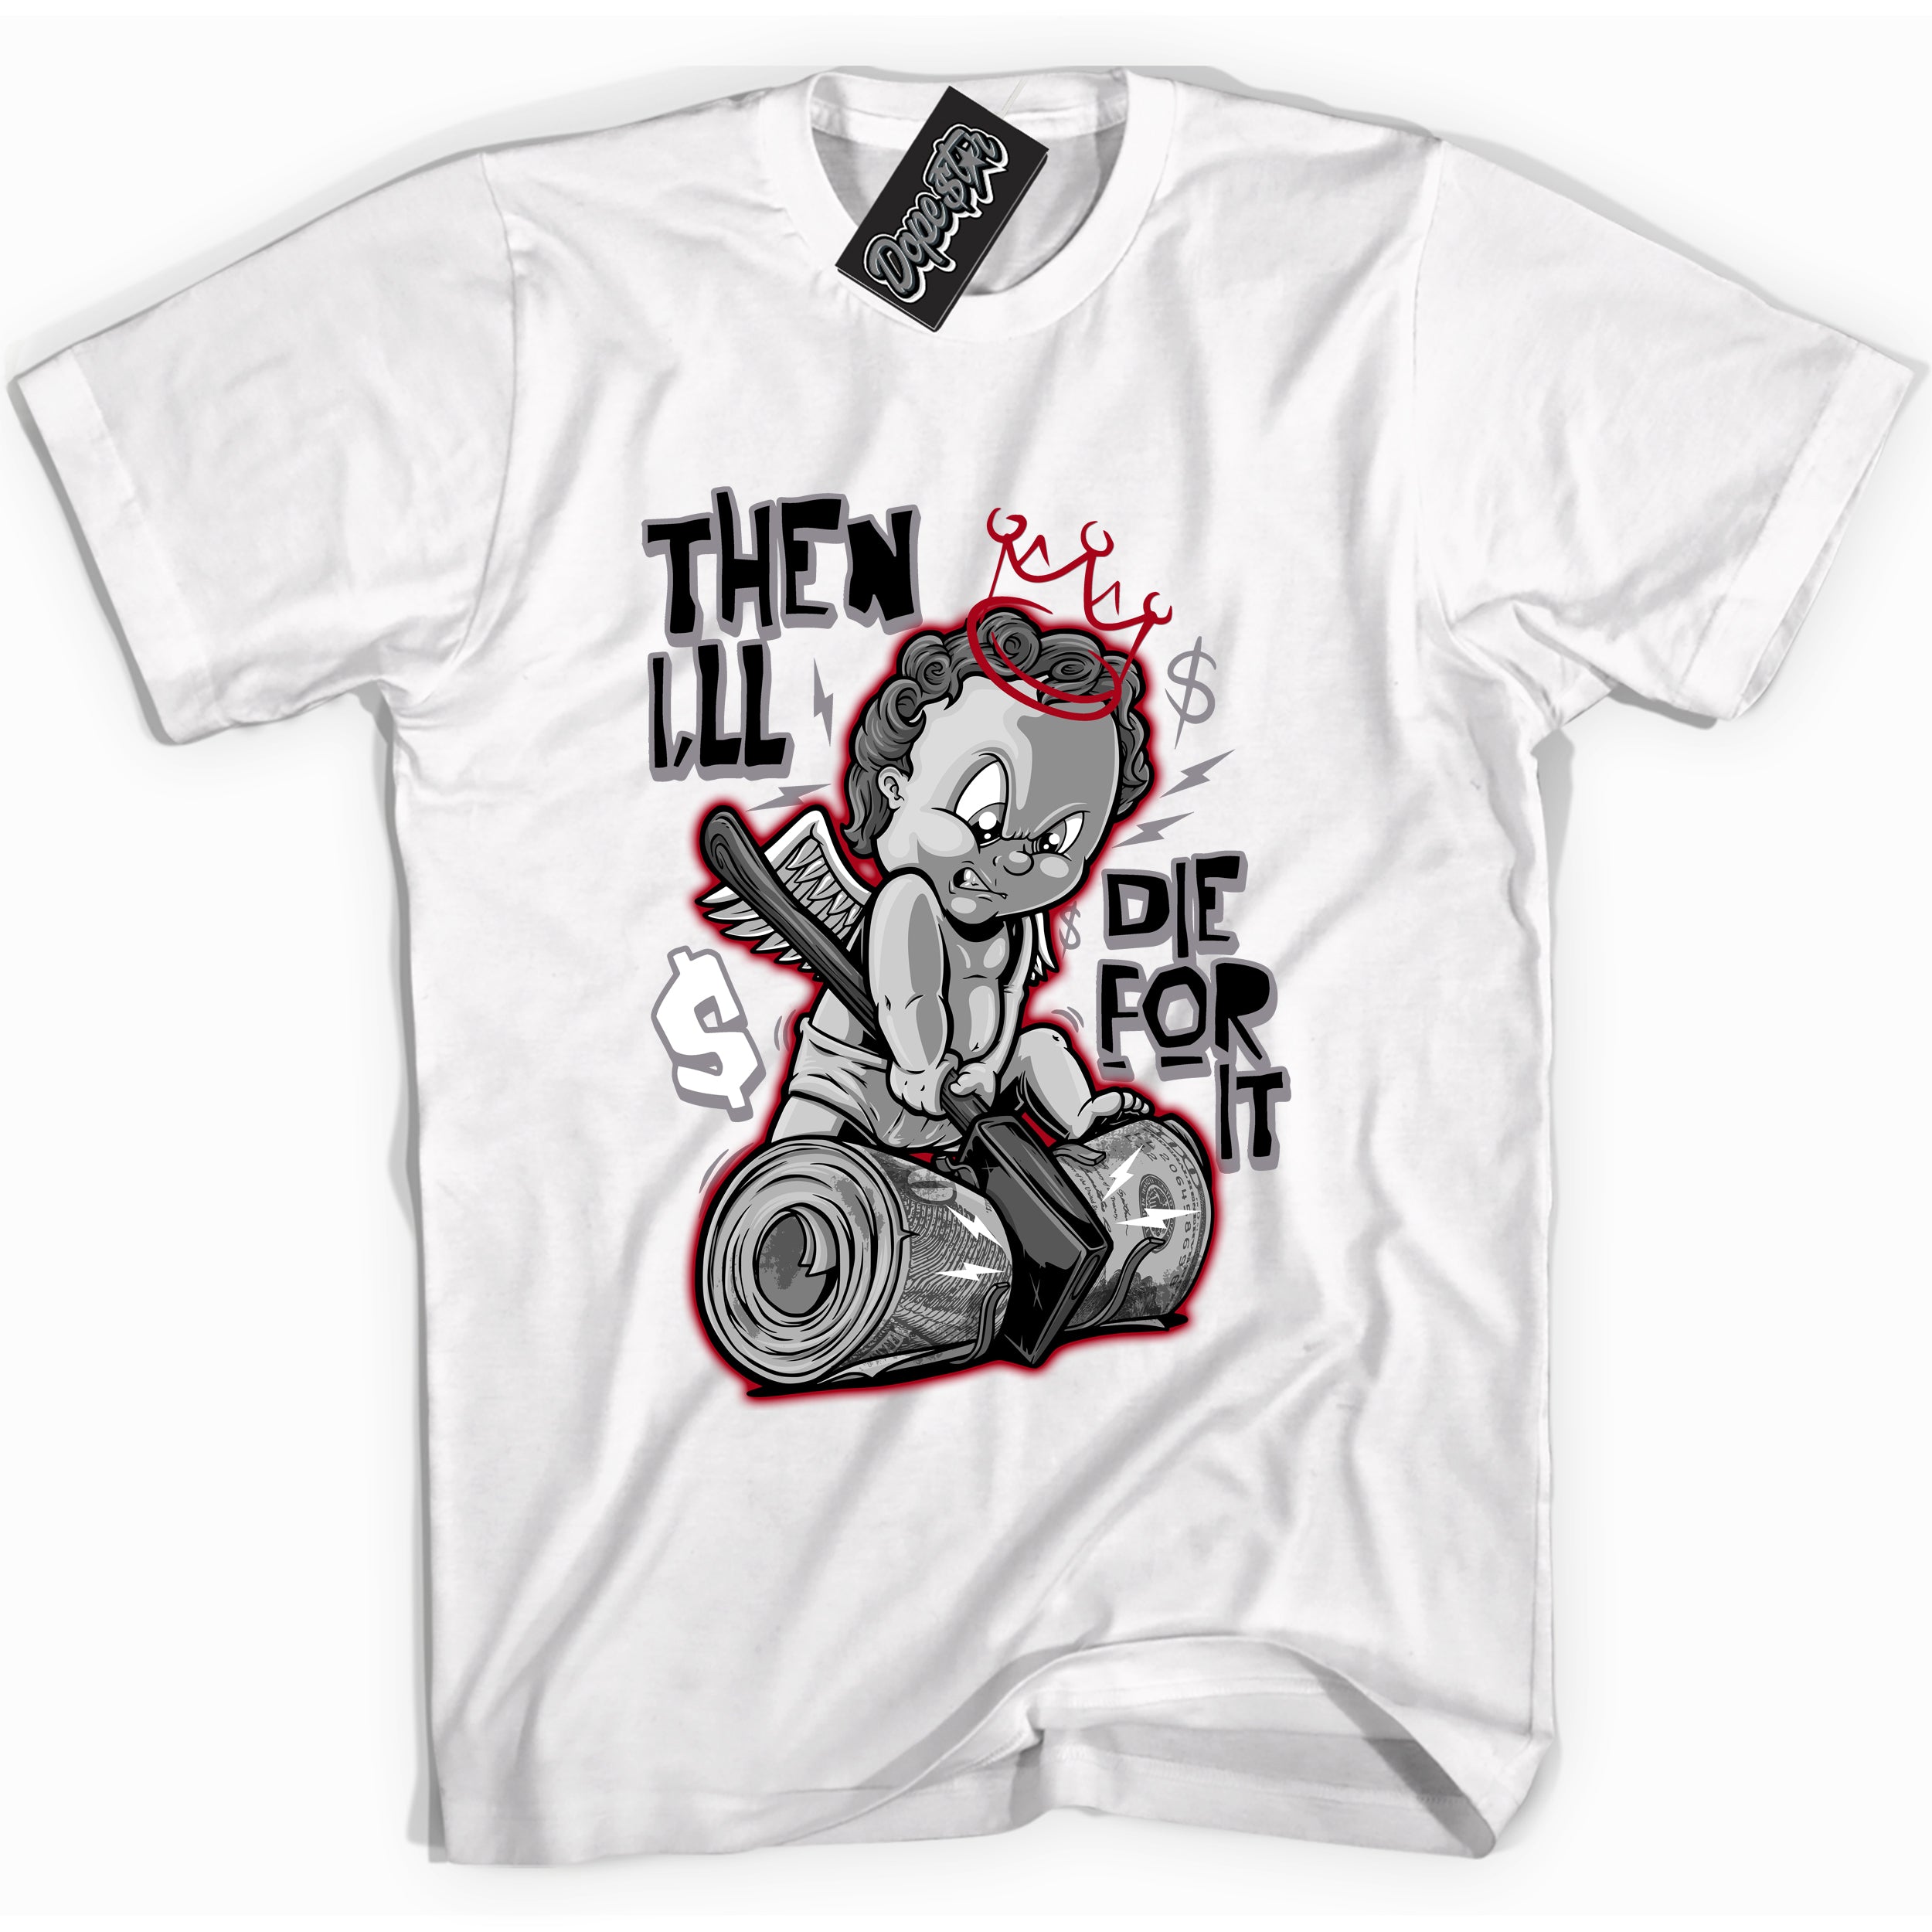 Cool White Shirt with “ Then I'll” design that perfectly matches Bred Reimagined 4s Jordans.